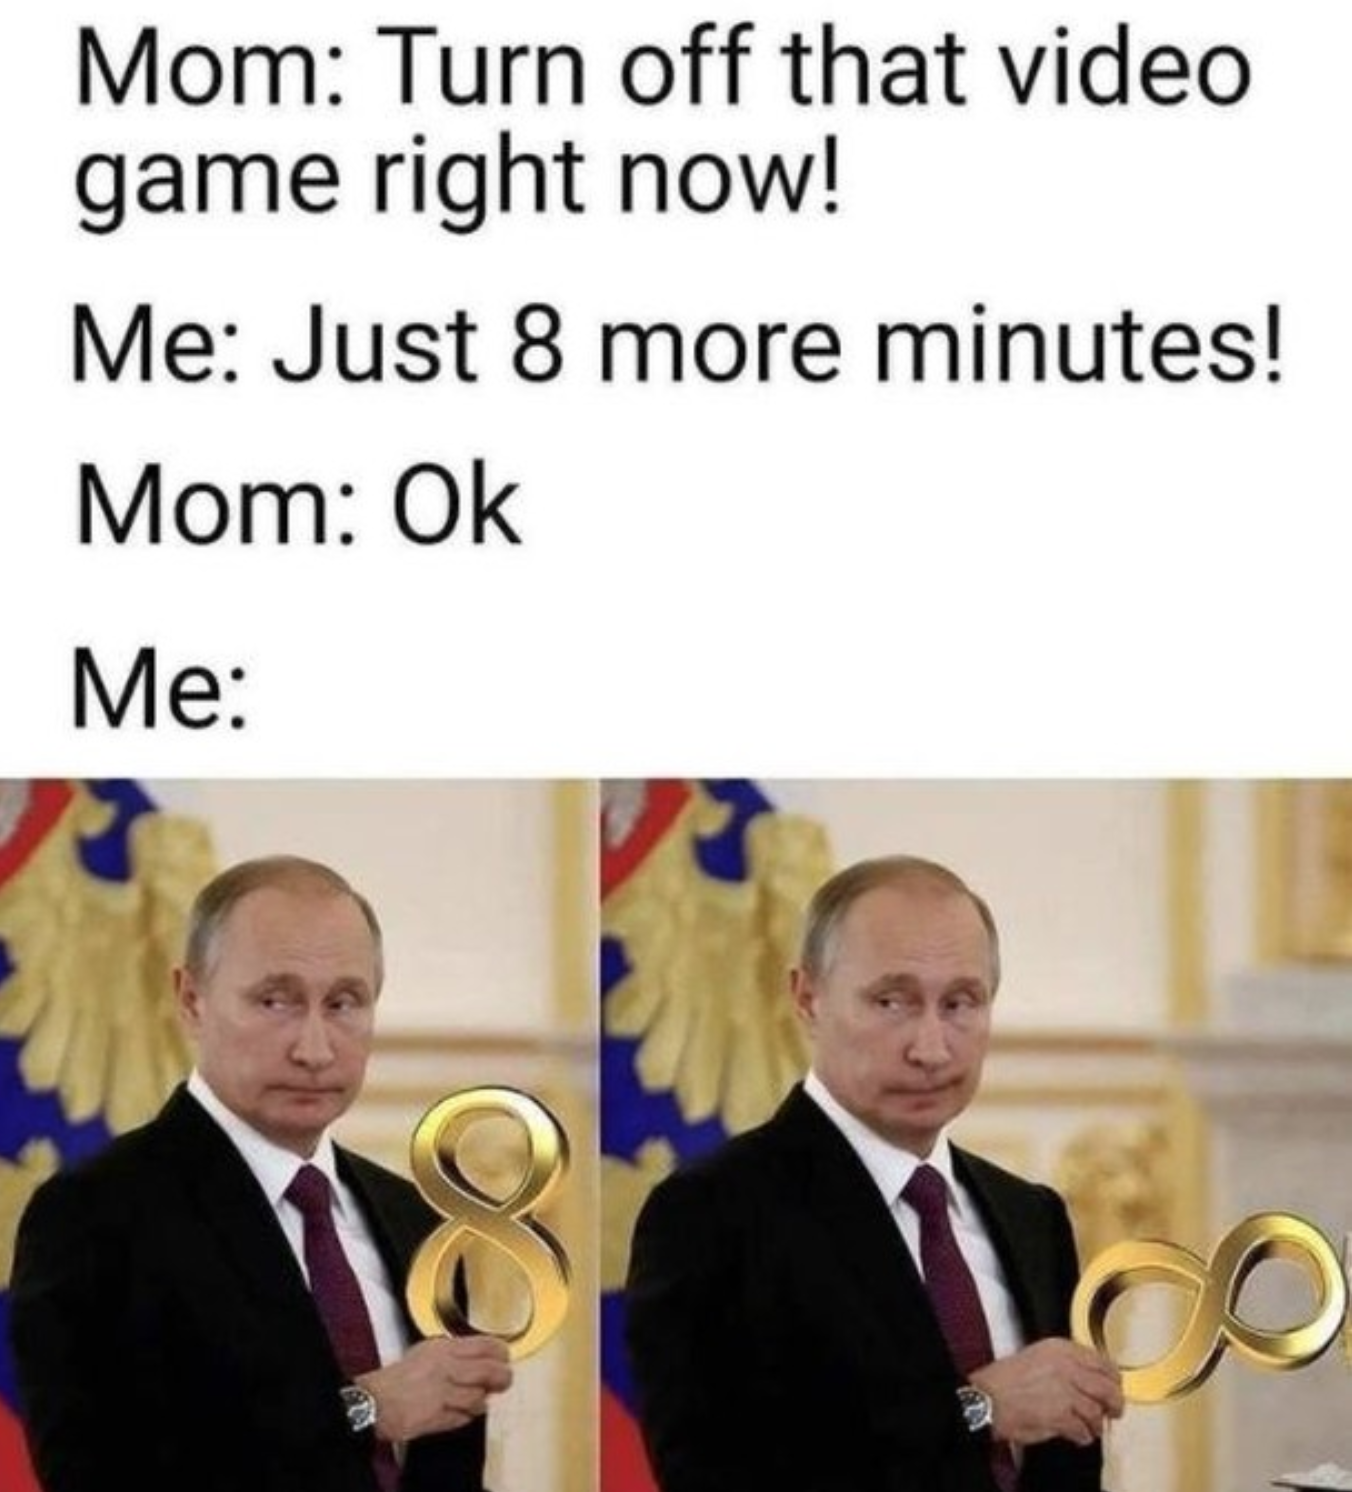 funny gaming memes  - just 8 more minutes meme - Mom Turn off that video game right now! Me Just 8 more minutes! Mom Ok Me De